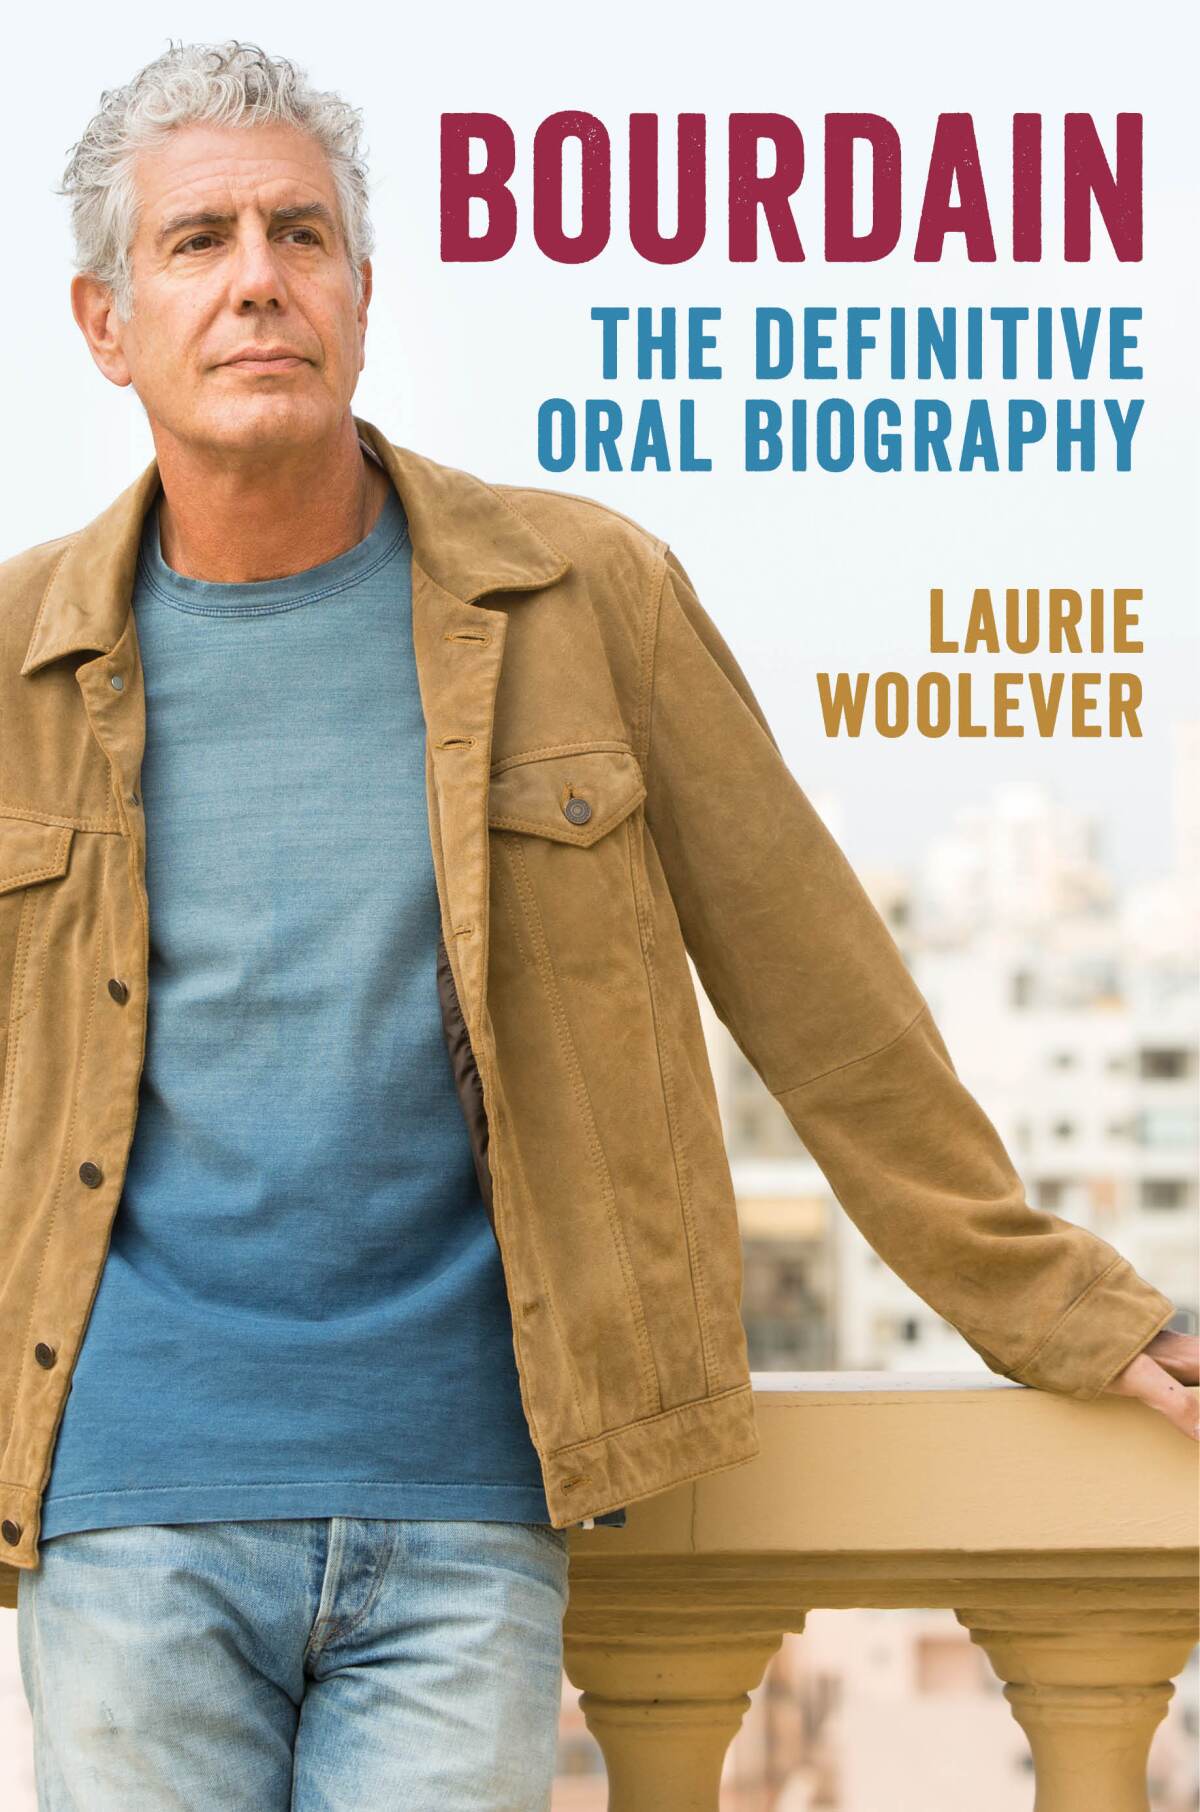 "Bourdain: The Definitive Oral Biography," by Laurie Woolever